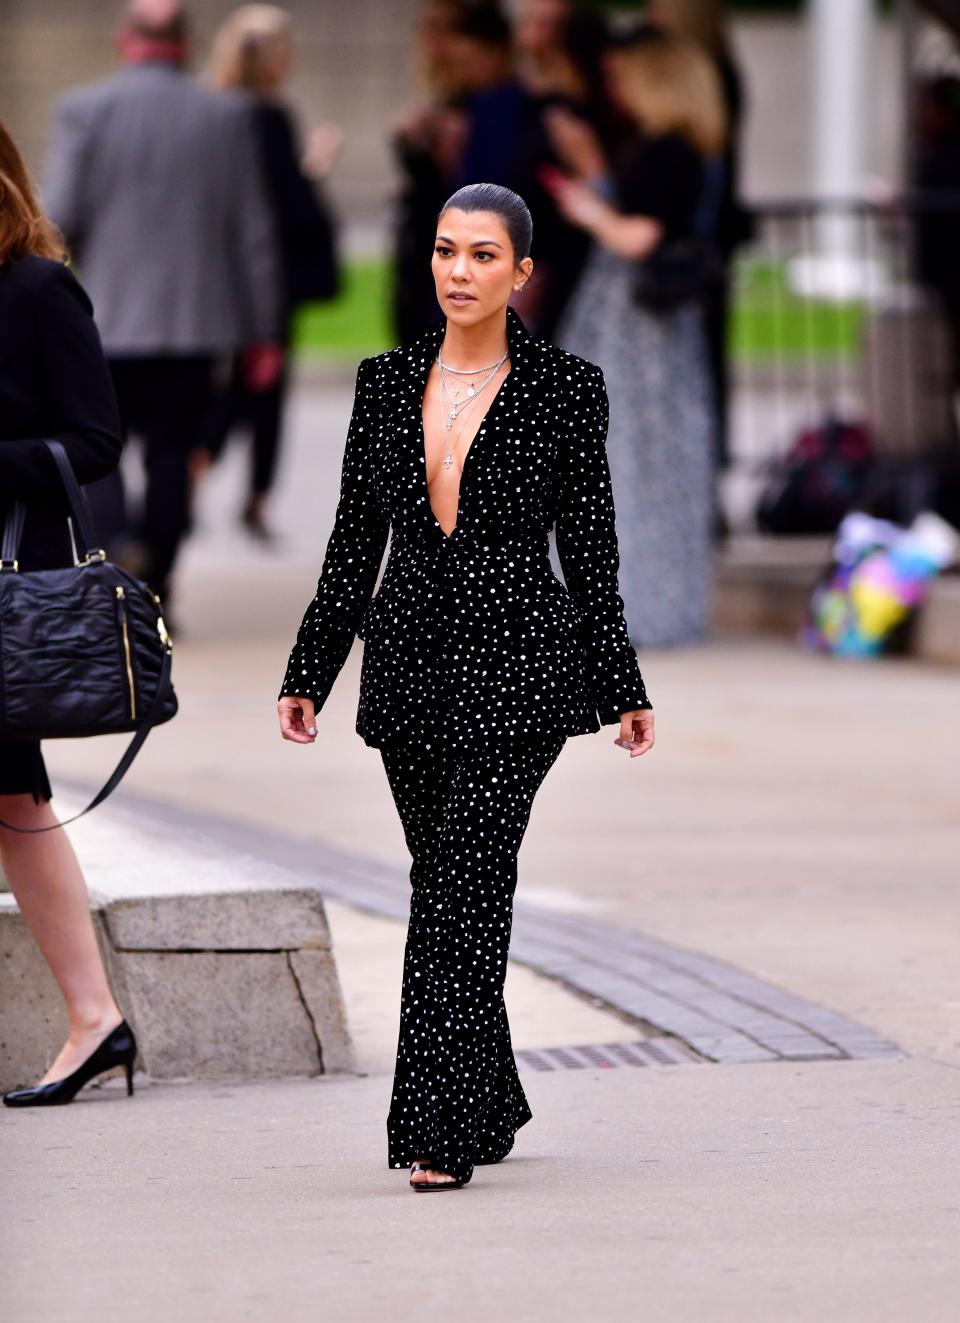 Kourtney in a black suit with silver sparkles throughout and no shirt underneath.